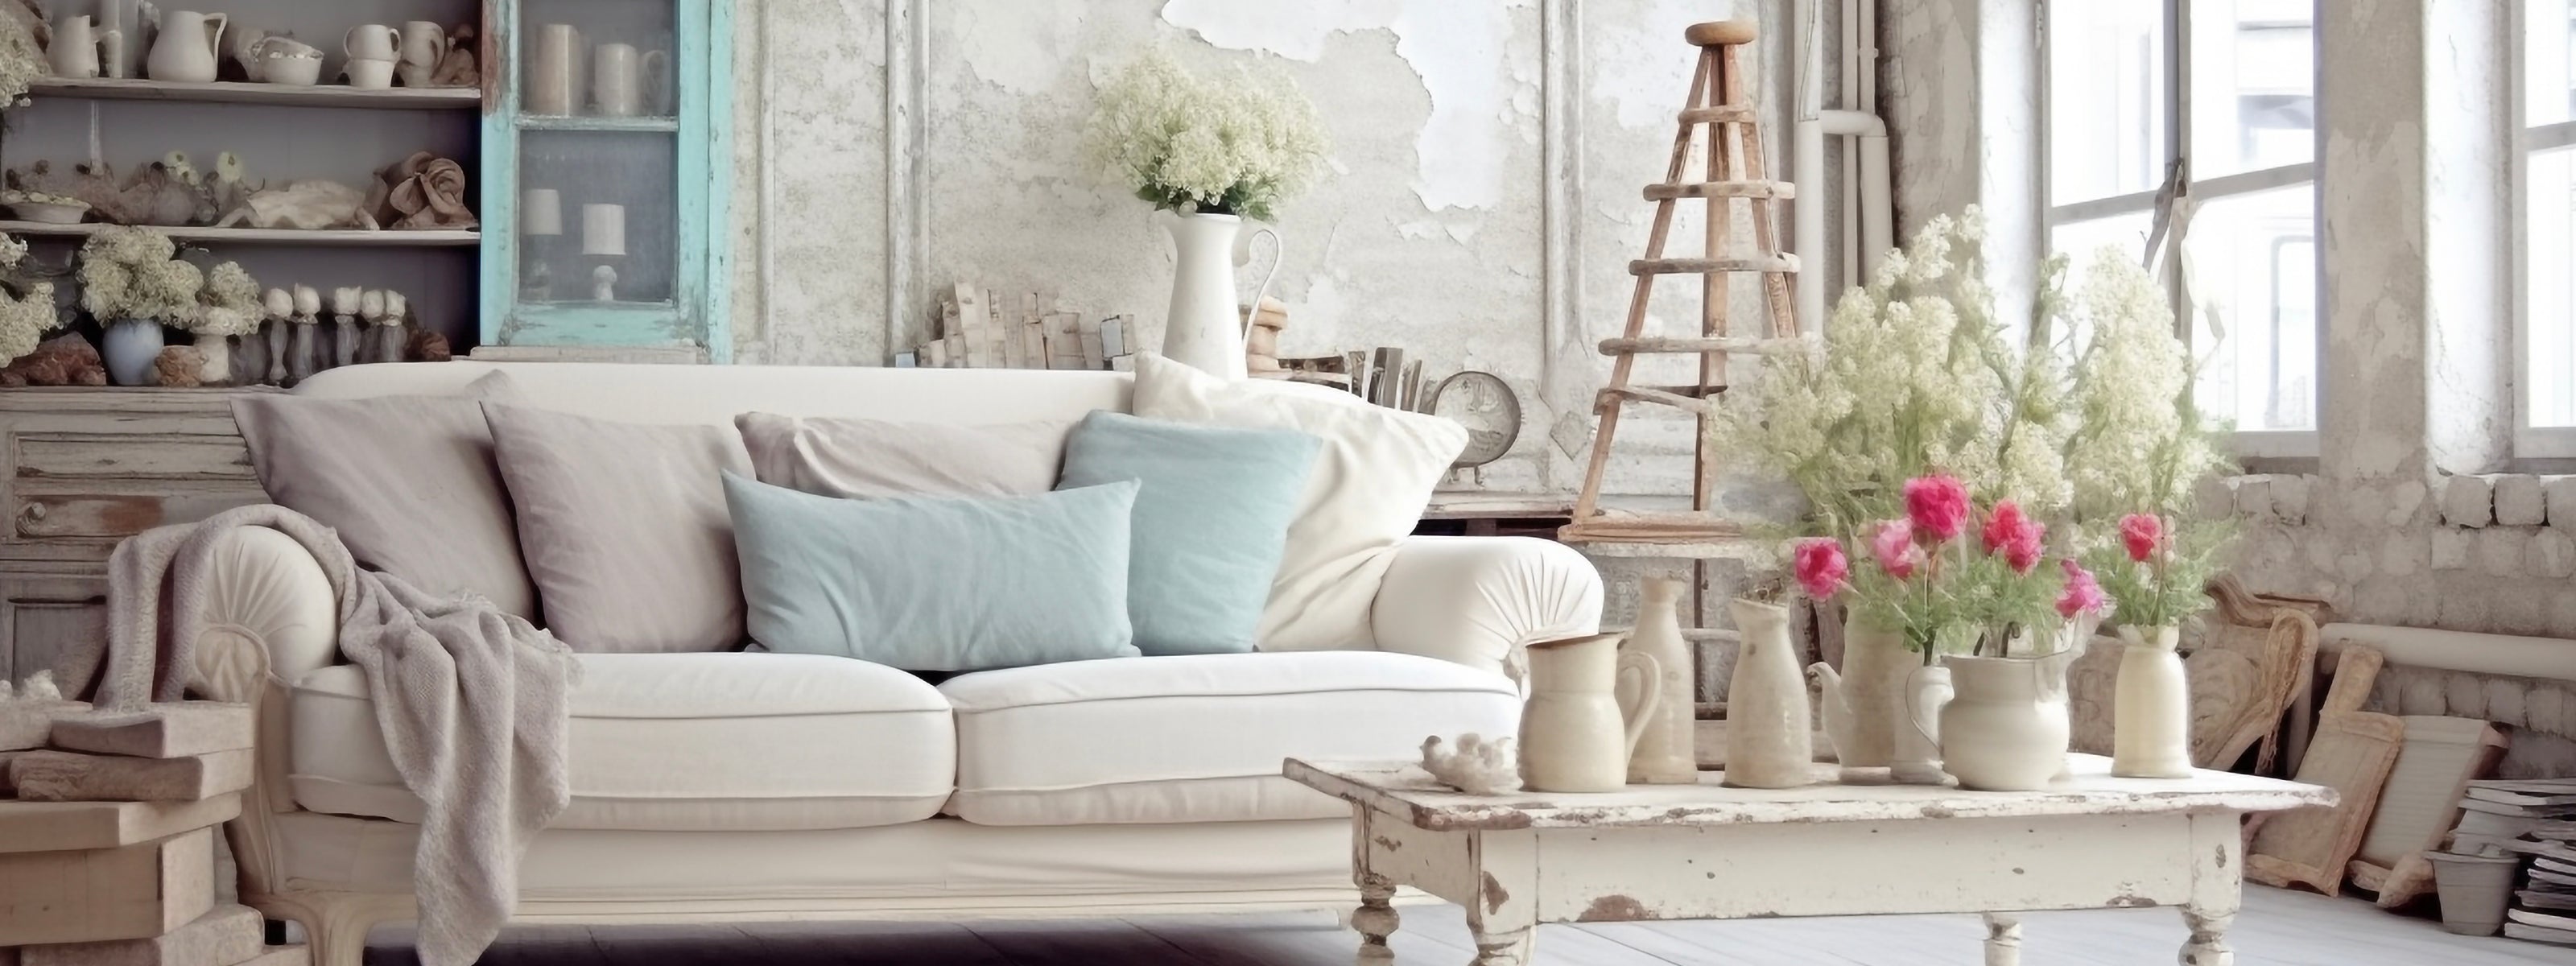 SHABBY CHIC - Belle Escape